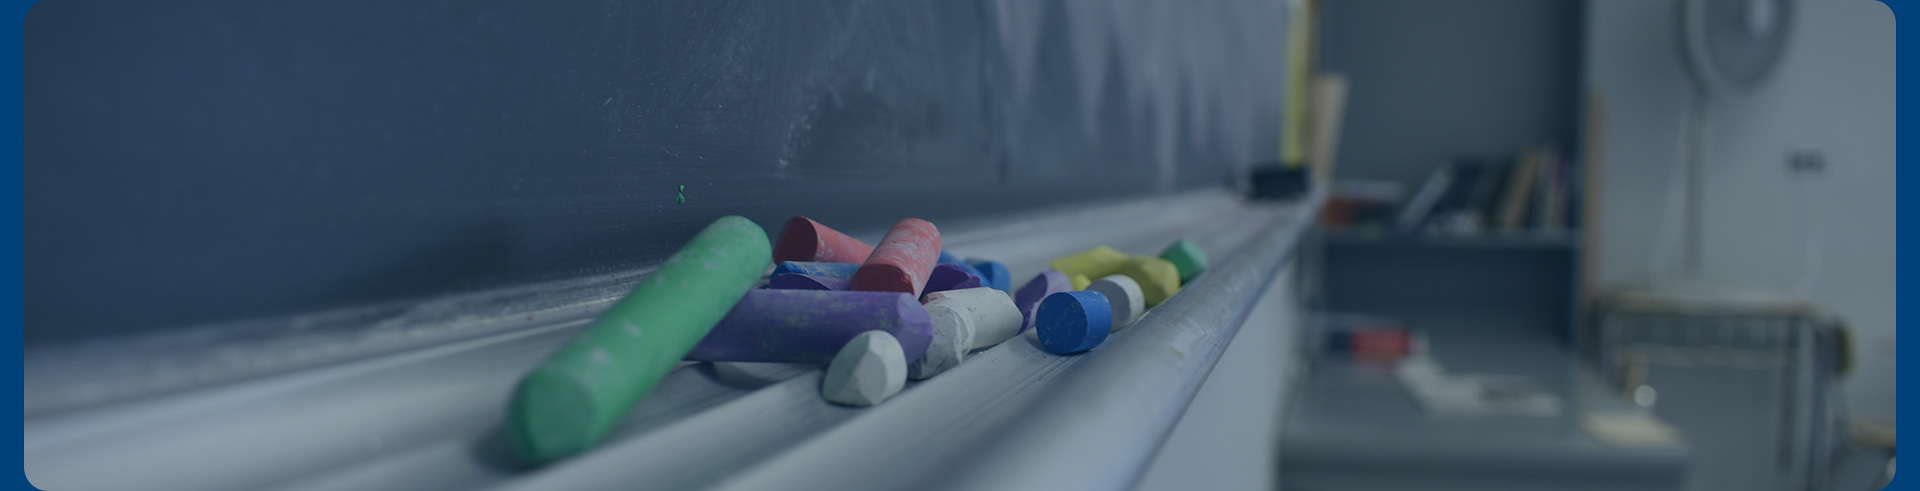 Artistic photo of chalk and a chalkboard